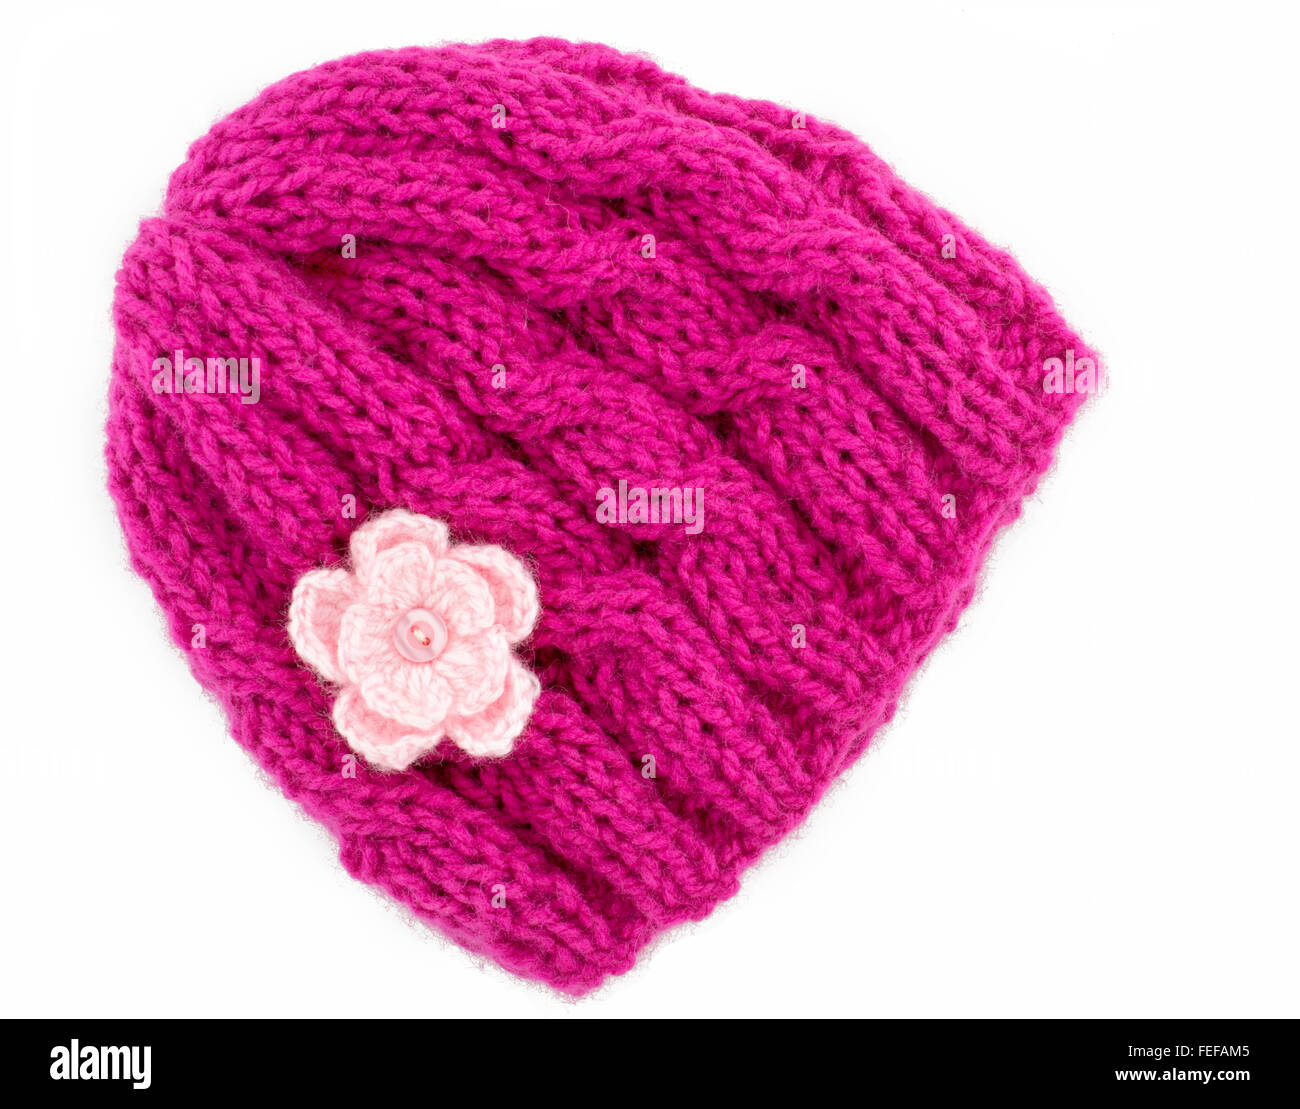 Pink wool knitted winter hat with a small crochet flower motifs, Hand knitted, On a white background Stock Photo